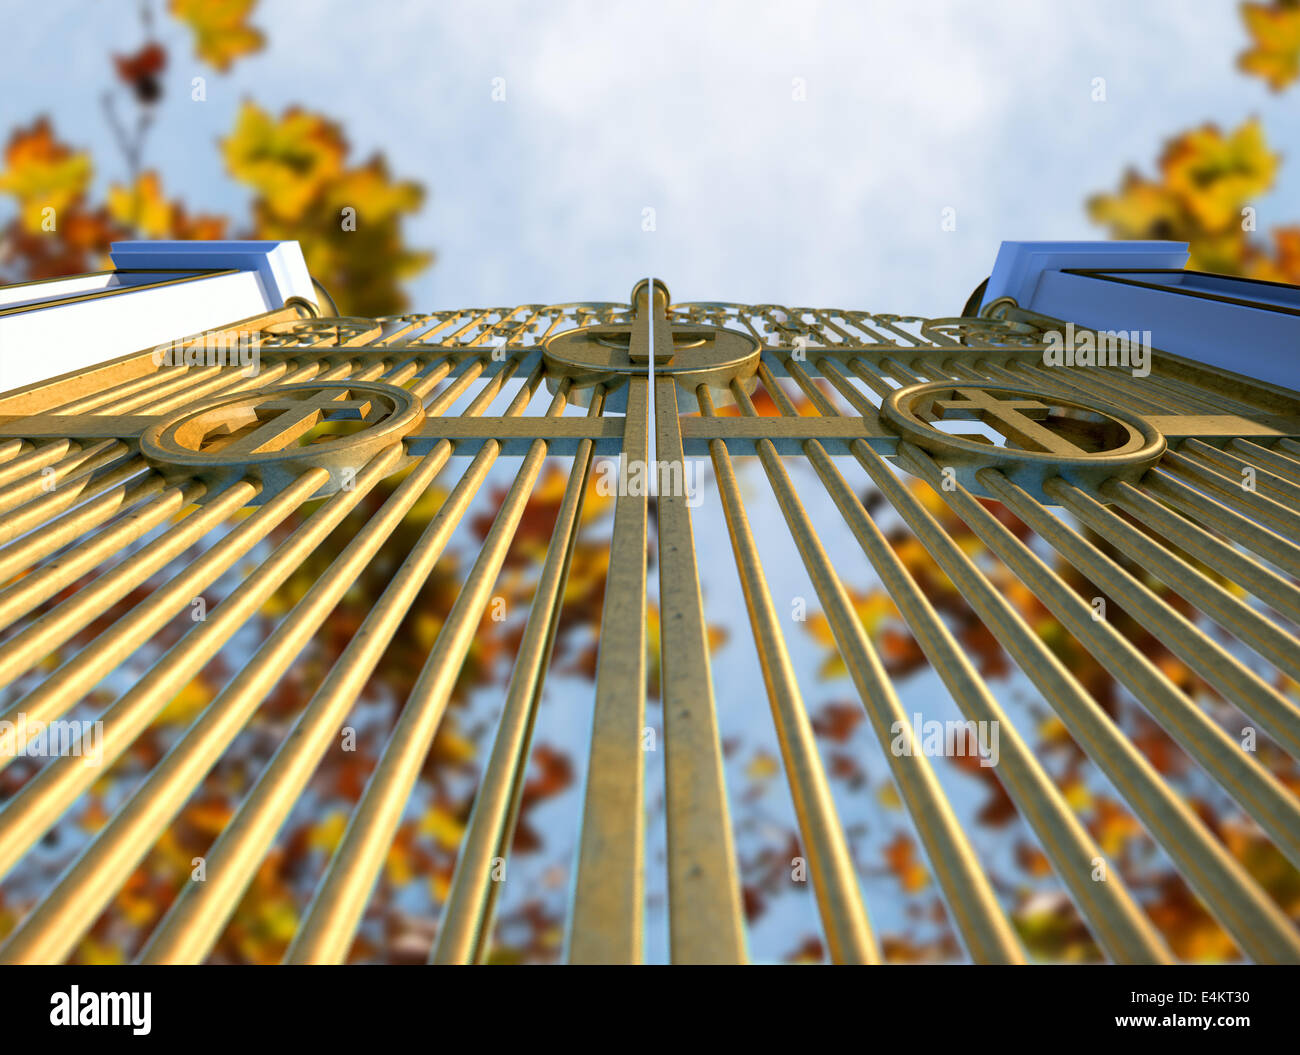 A concept image of the golden gates to heaven shut on an autumn leave and blue sky background Stock Photo